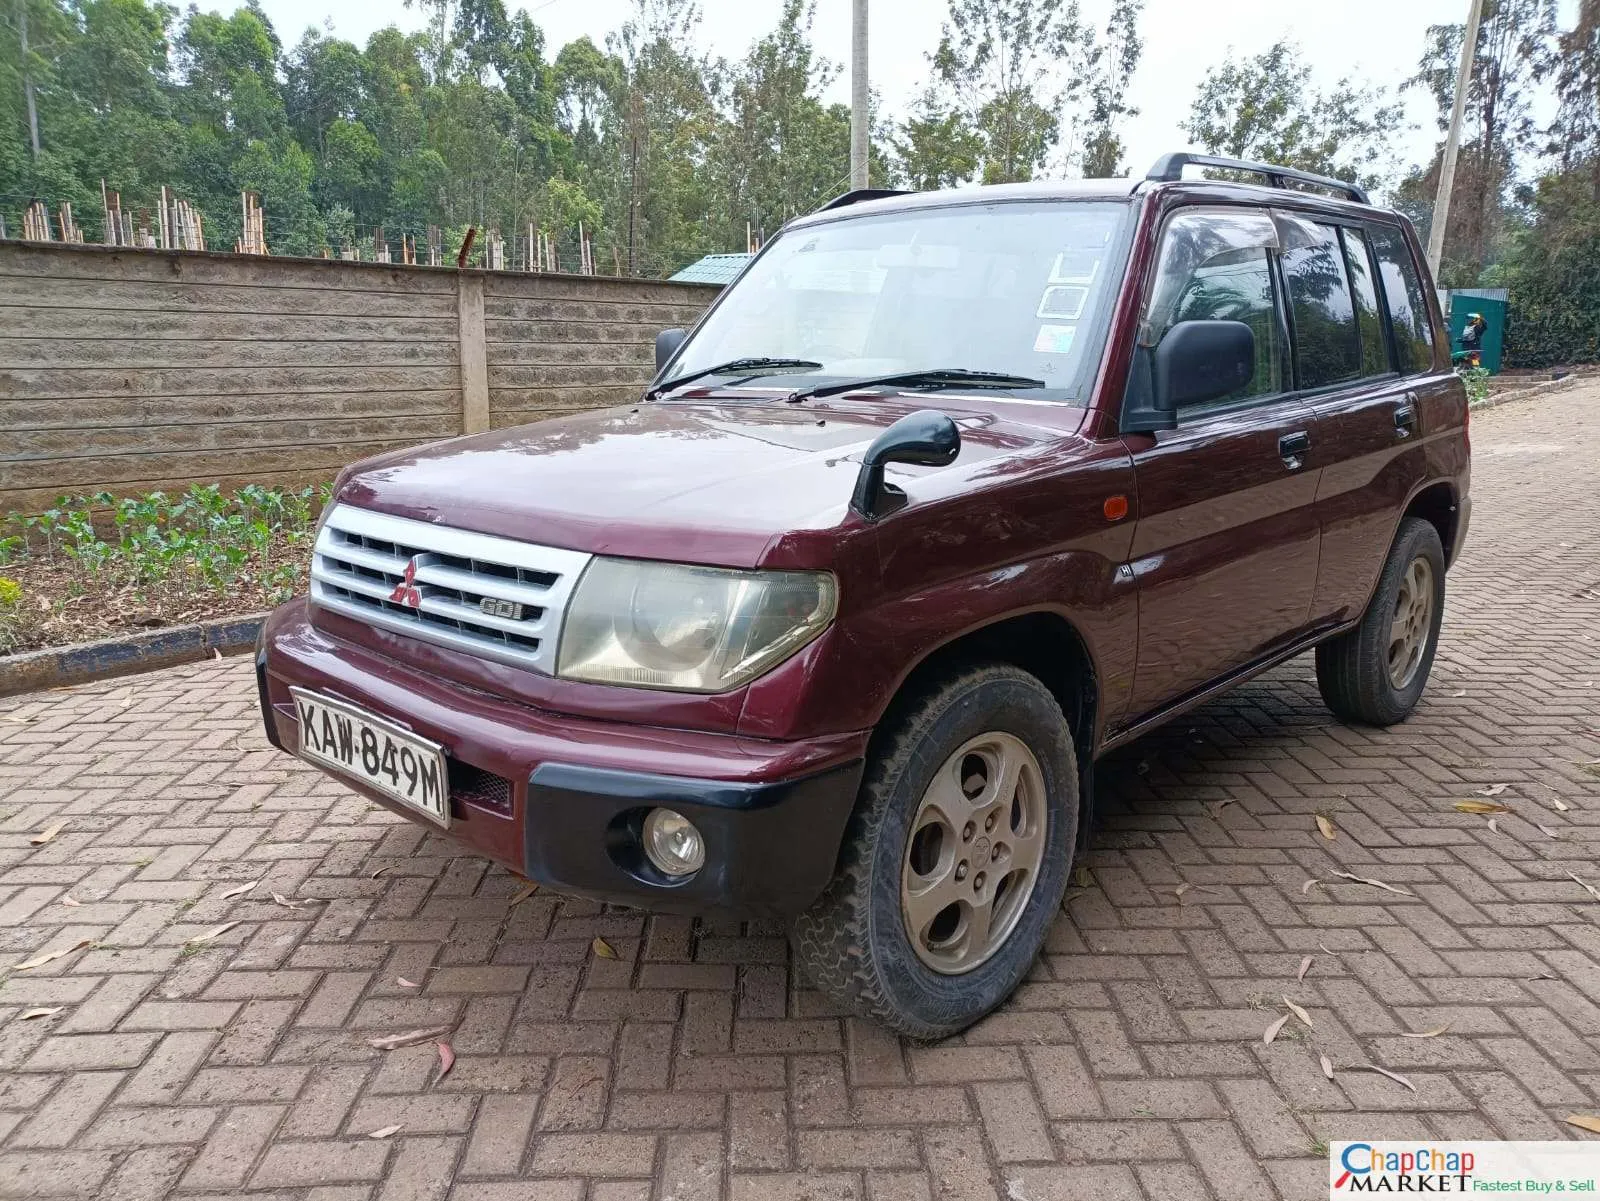 Cars Cars For Sale/Vehicles-Mitsubishi Pajero IO for sale in Kenya 30% Pay Deposit Trade in Ok Hot Deal 3